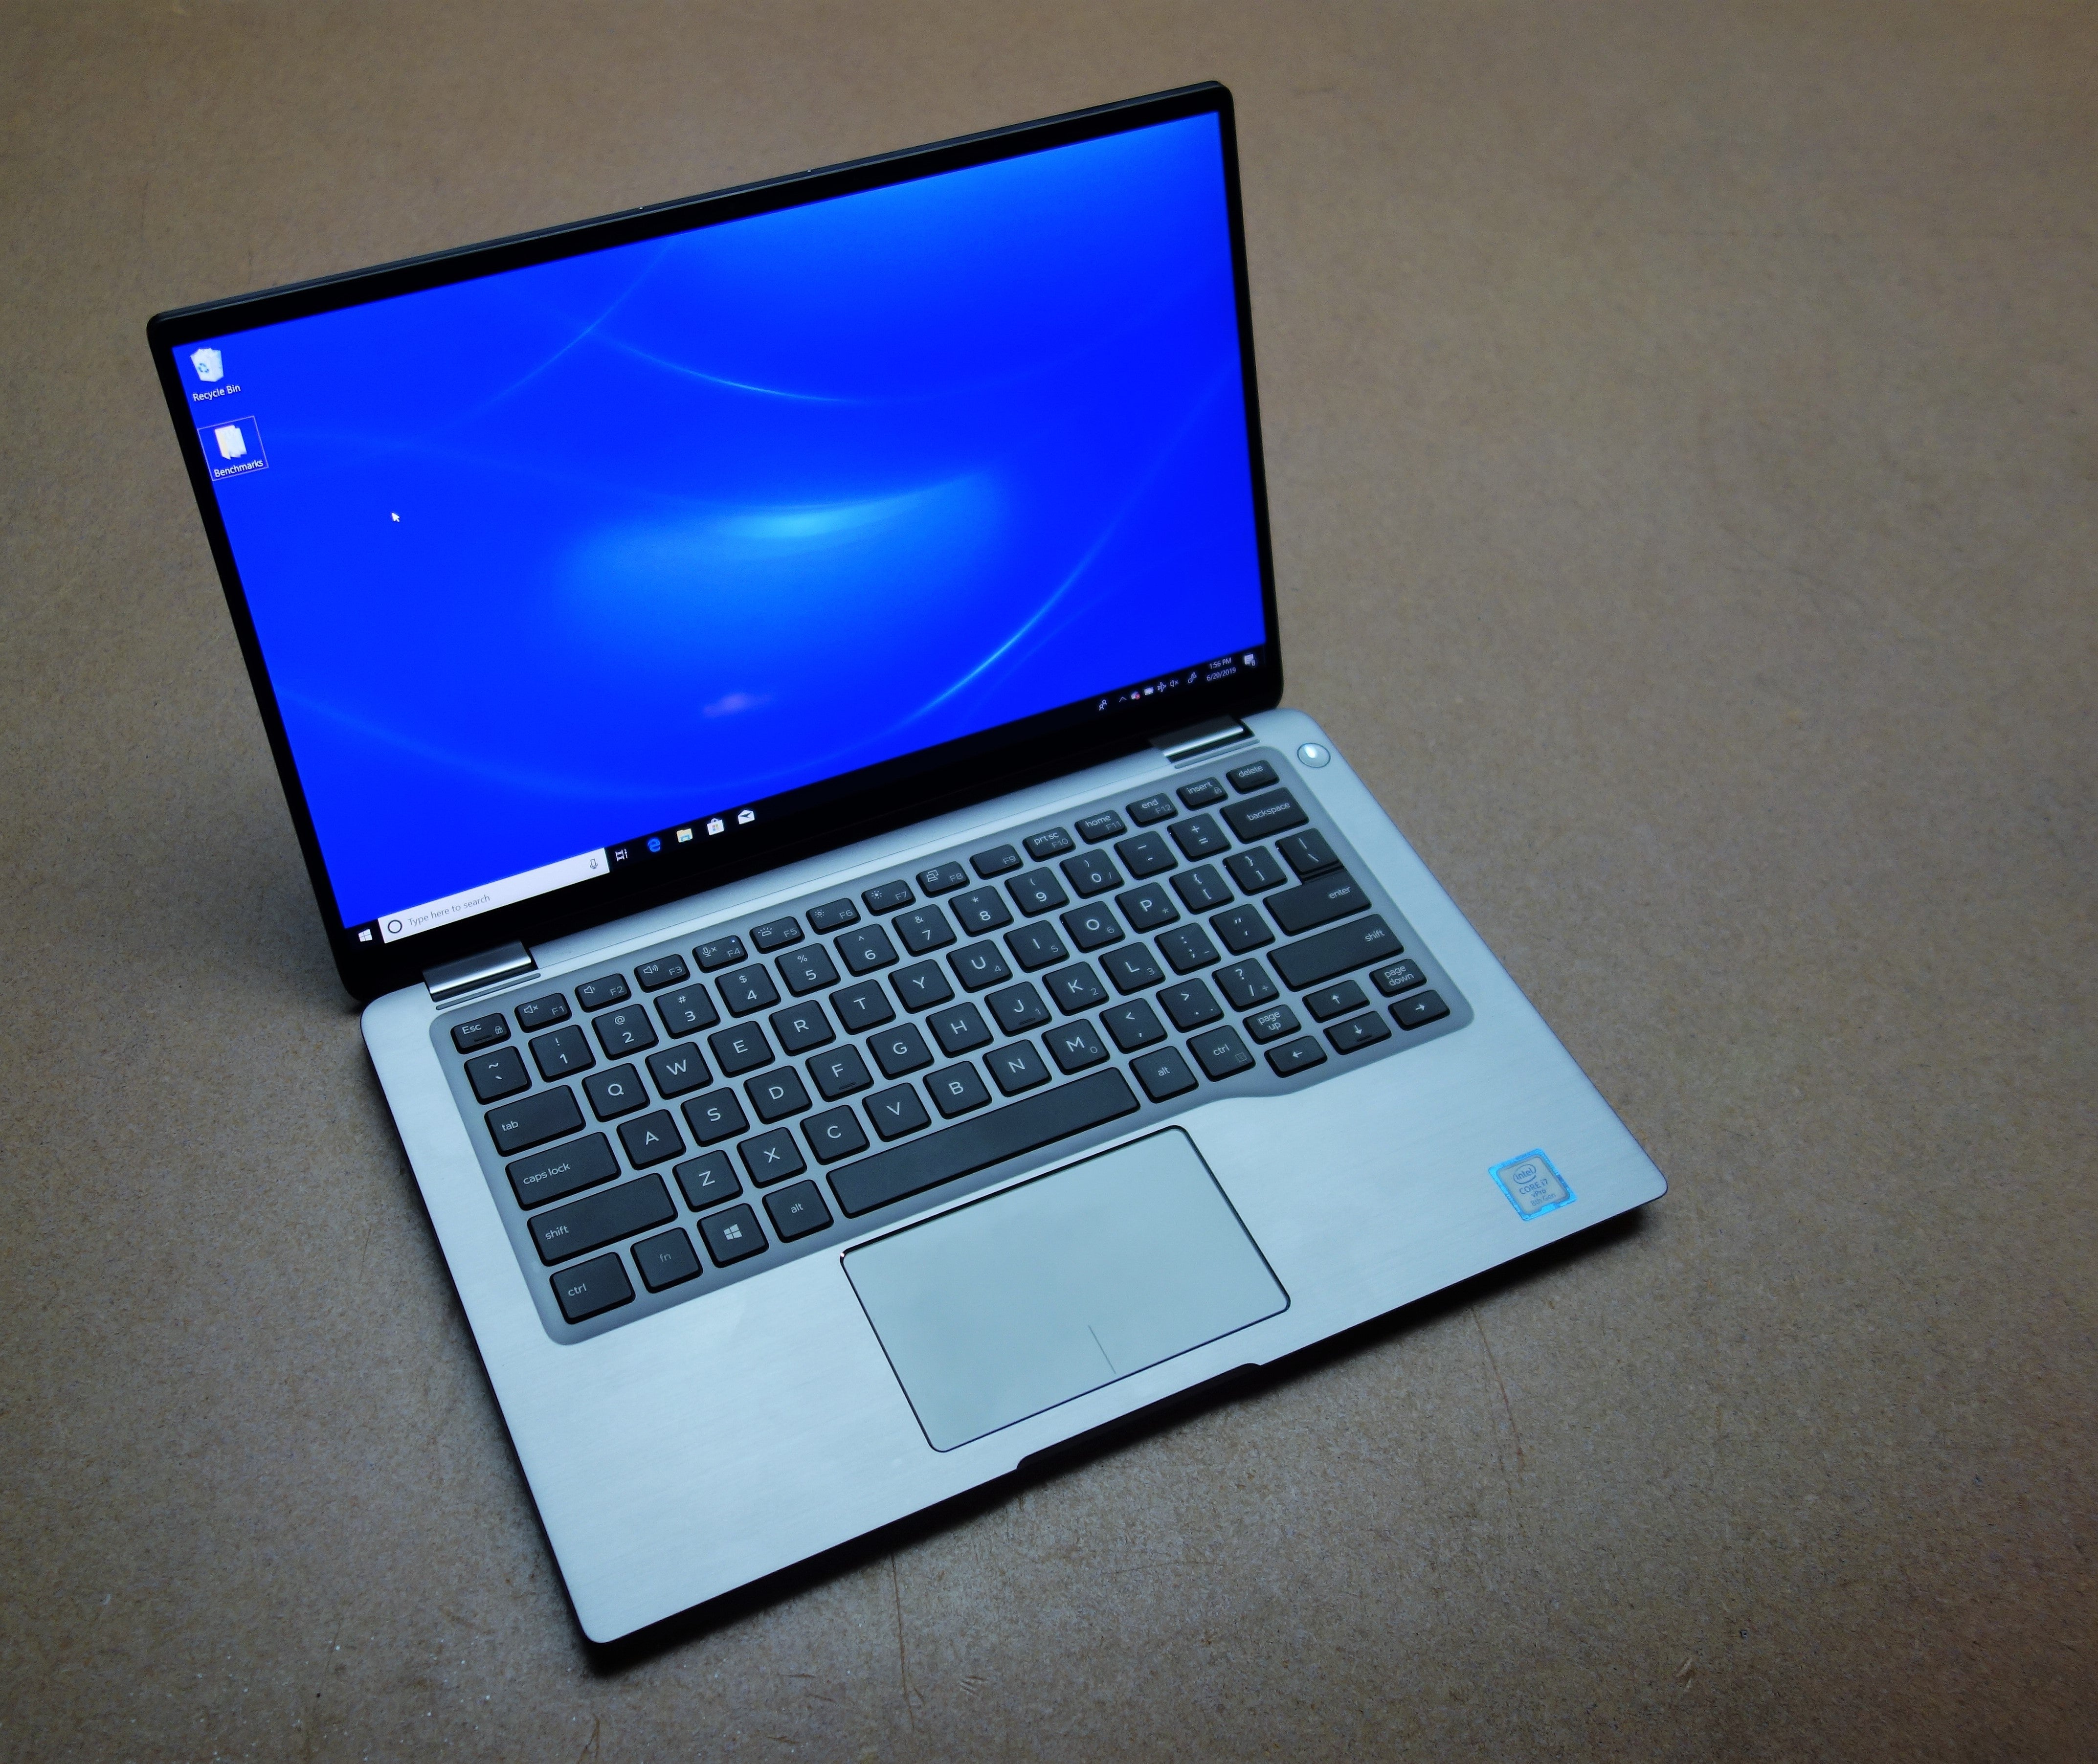 Dell Latitude 7400 2 In 1 Review A Nearly Perfect Combination Of Power